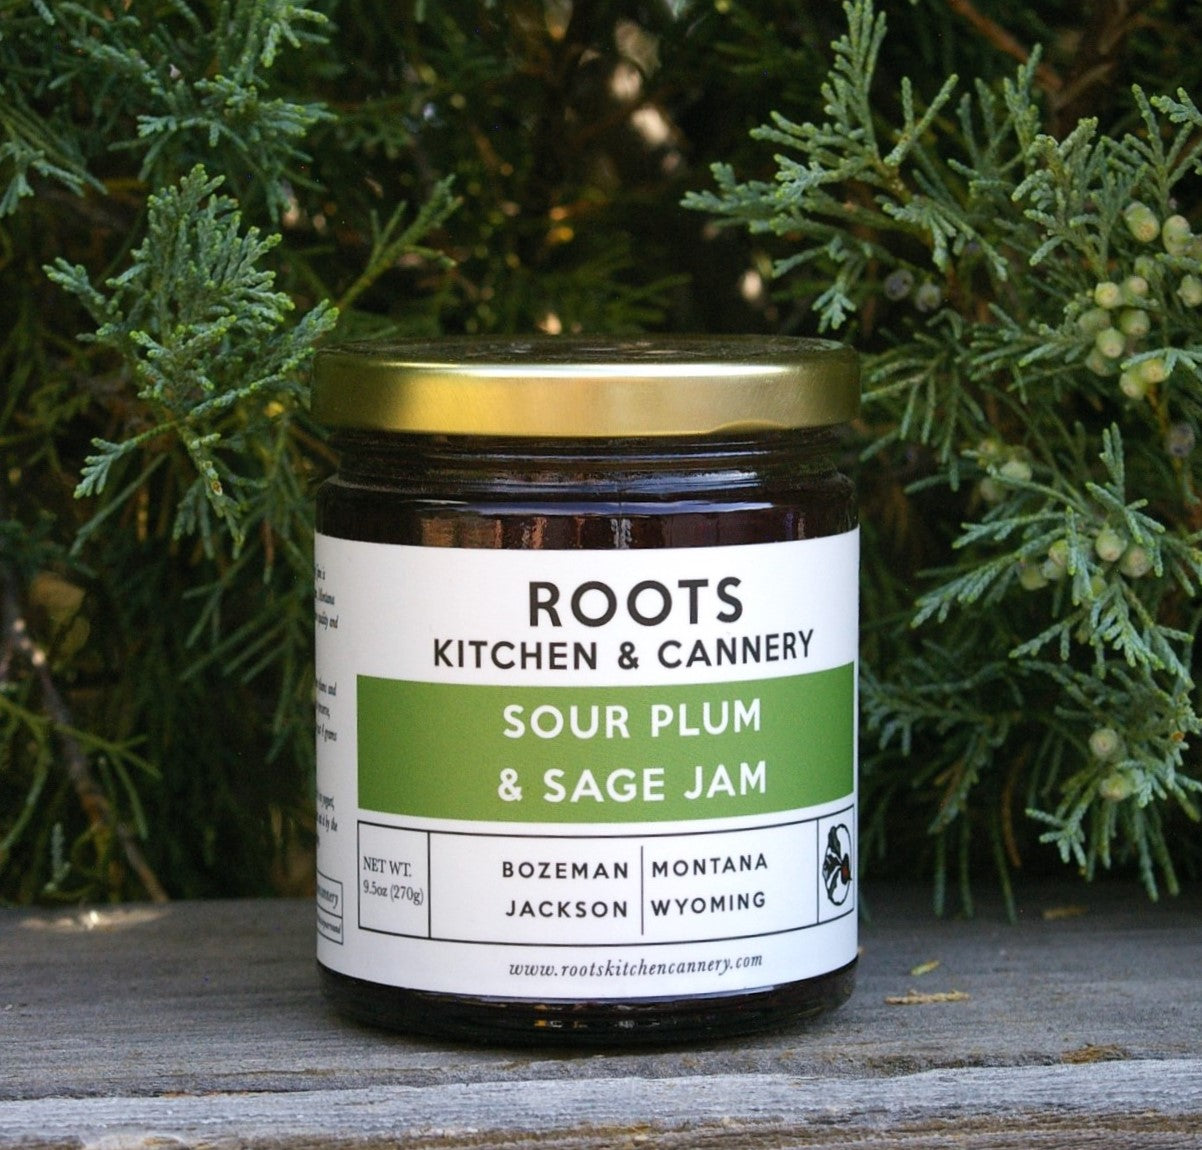 Roots Kitchen & Cannery Sour Plum & Sage Jam